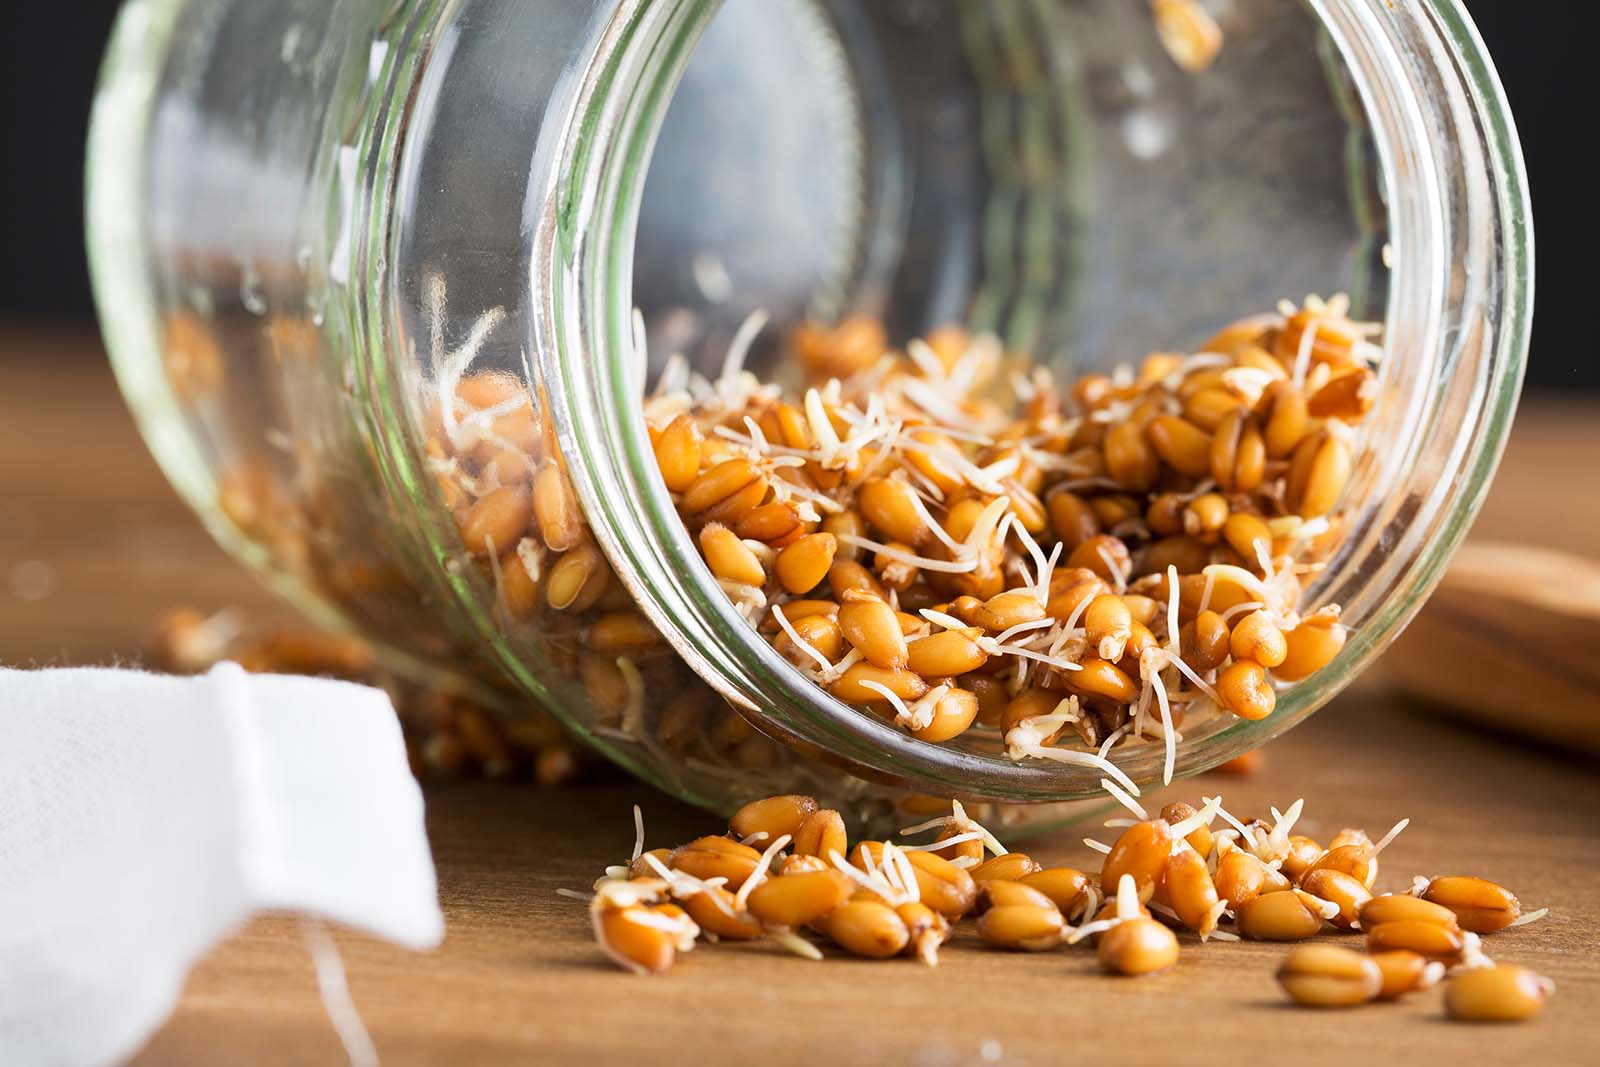 The Pros and Cons of Sprouted Grains